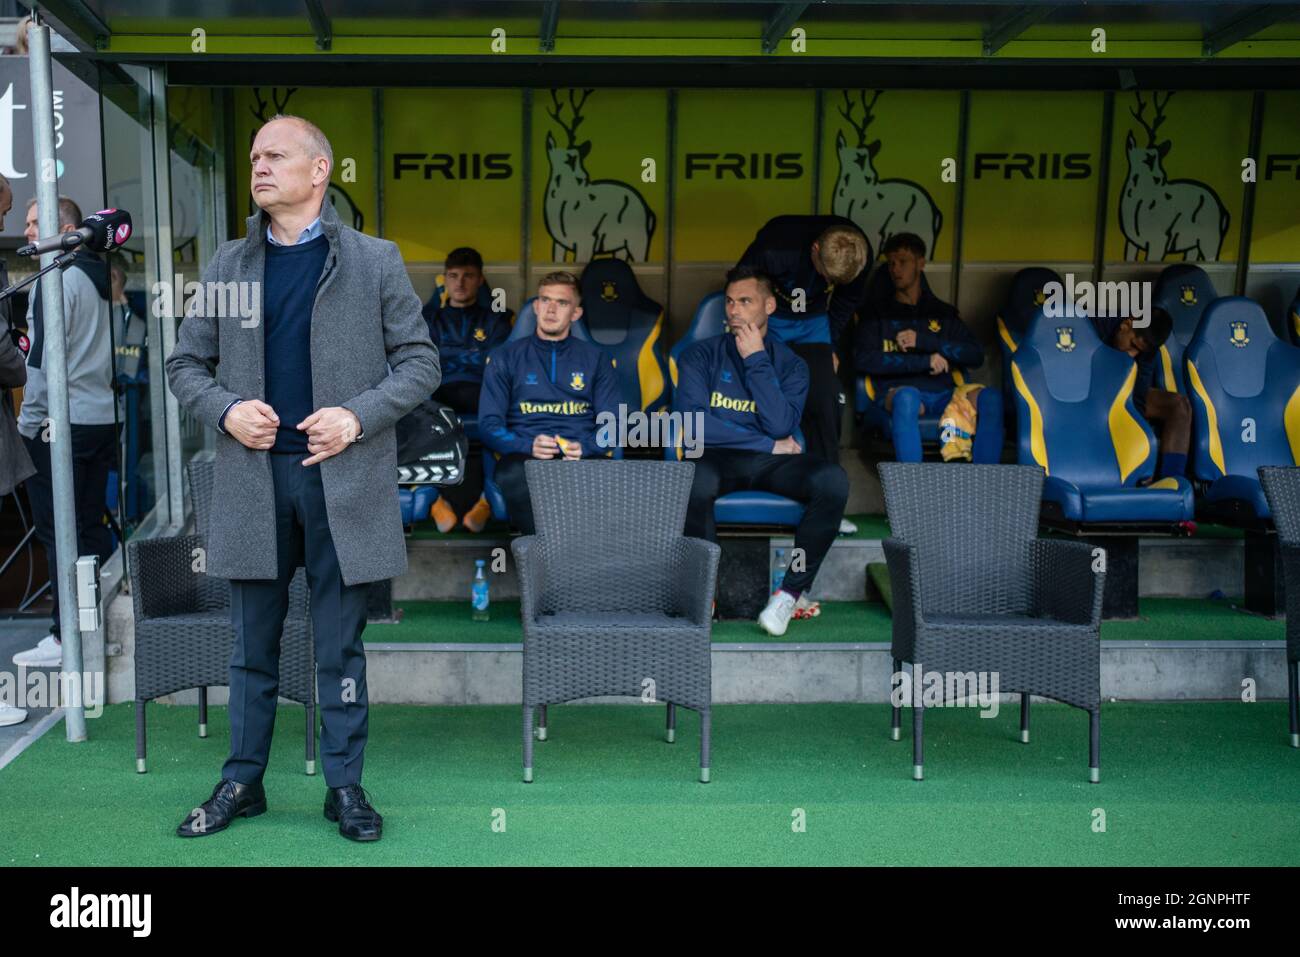 Brondby, Denmark. 26th Sep, 2021. Head coach Niels Frederiksen of Broendby IF seen during the 3F Superliga match between Broendby IF and Aalborg Boldklub at Brondby Stadion. (Photo Credit: Gonzales Photo/Alamy Live News Stock Photo